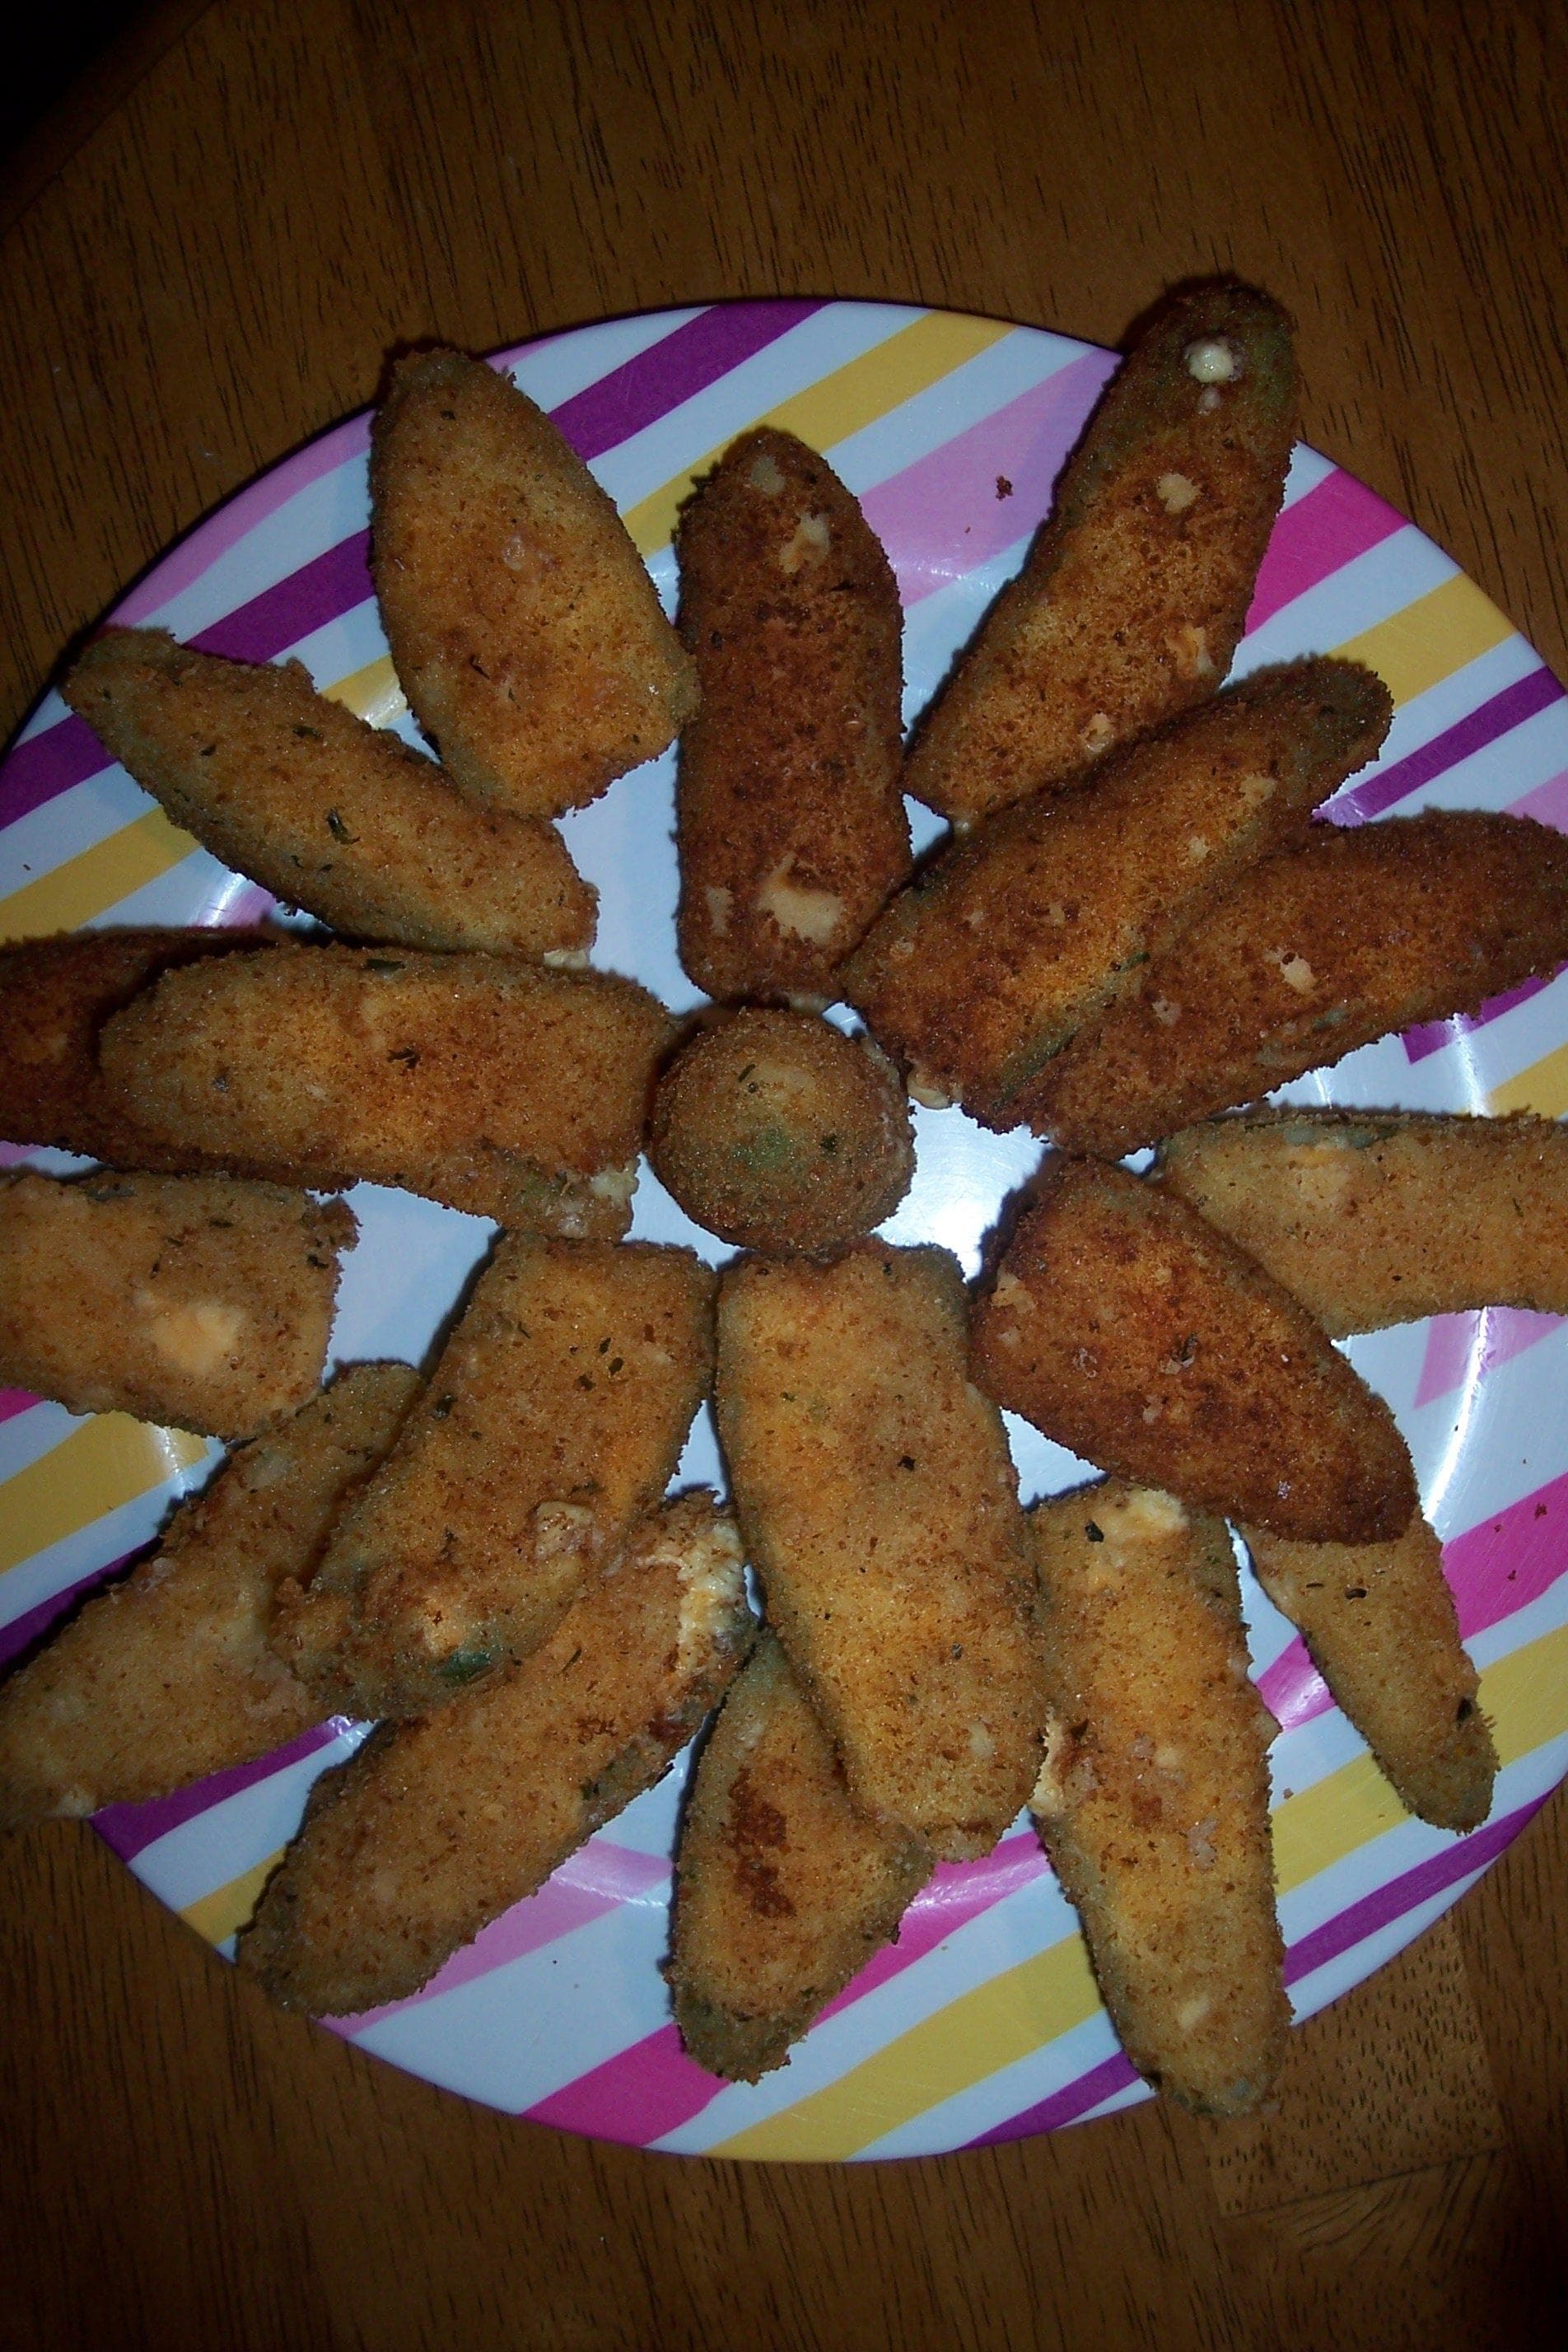 Jalapeño popper on Random Most Delicious Foods to Dunk of Deep Fry